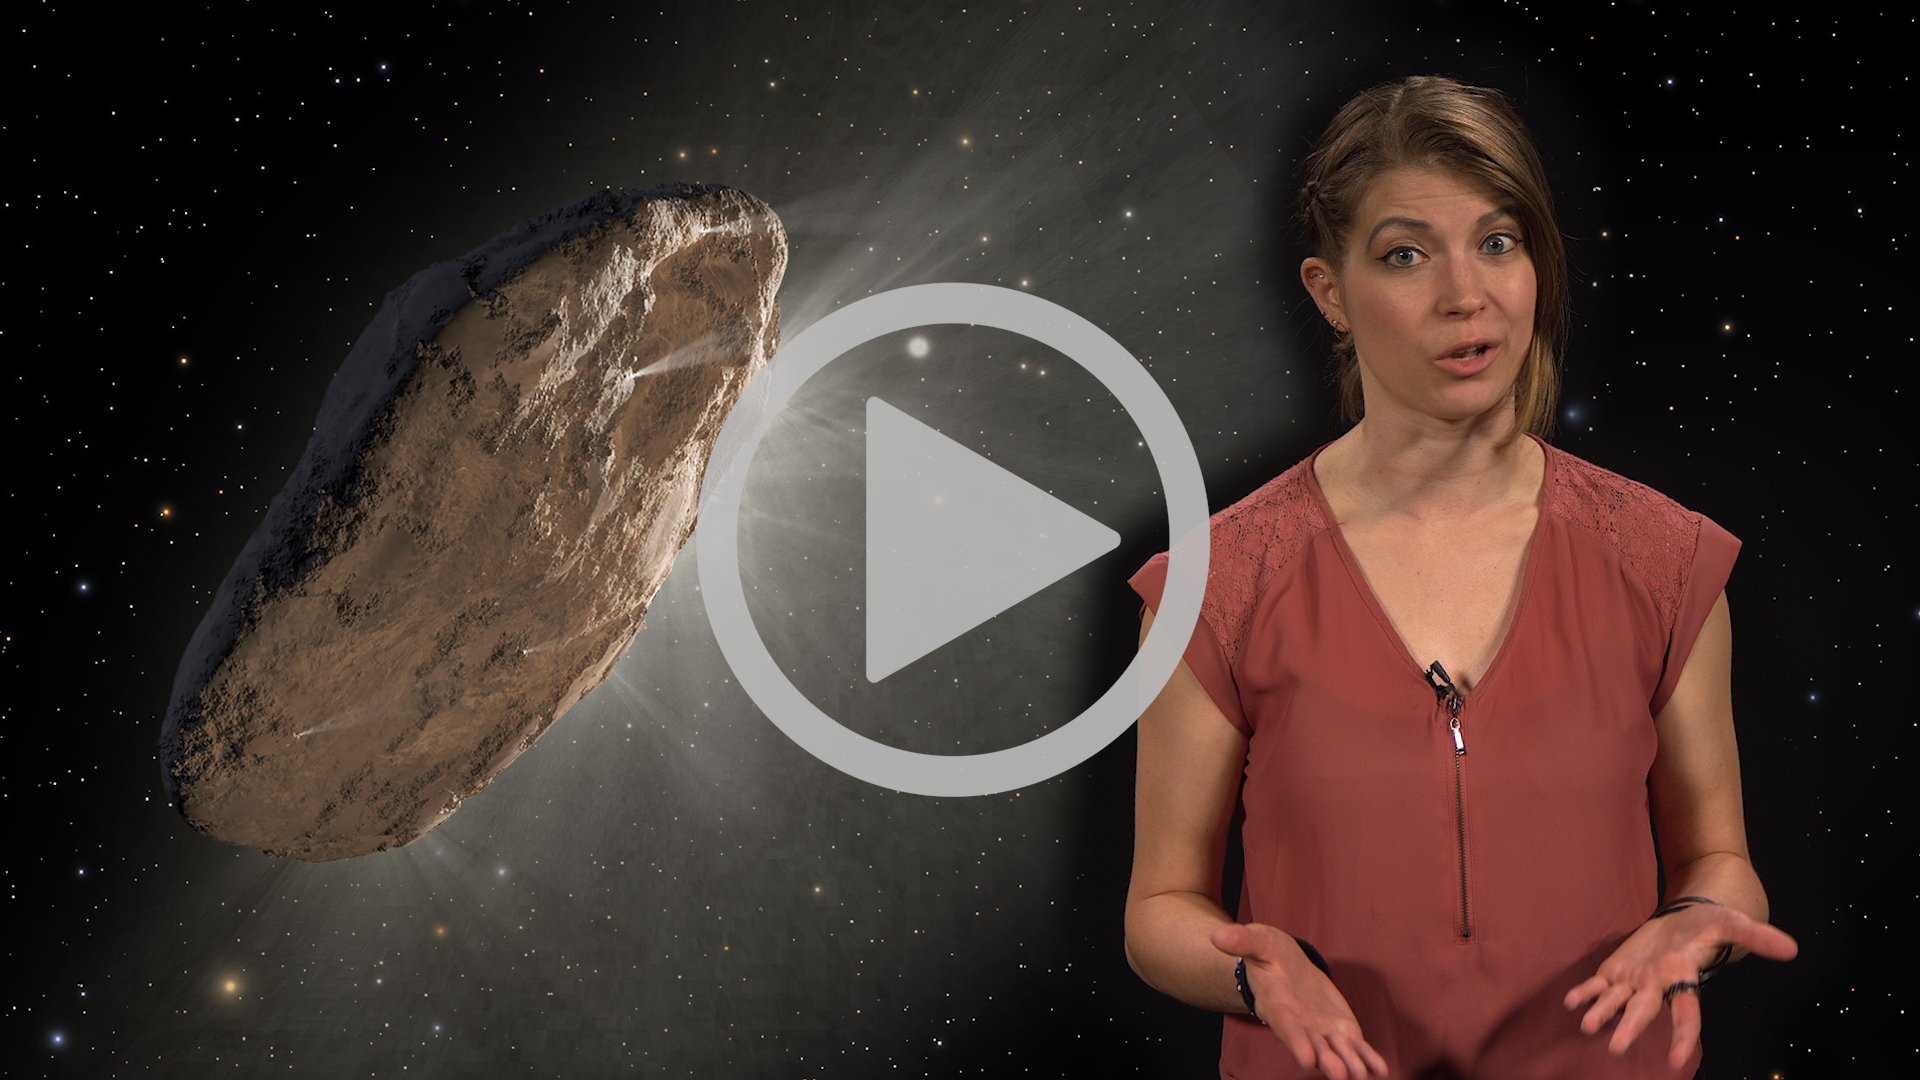 video showing how observatories, including NASA’s Hubble Space Telescope, found that ‘Oumuamua gained an extra boost of speed